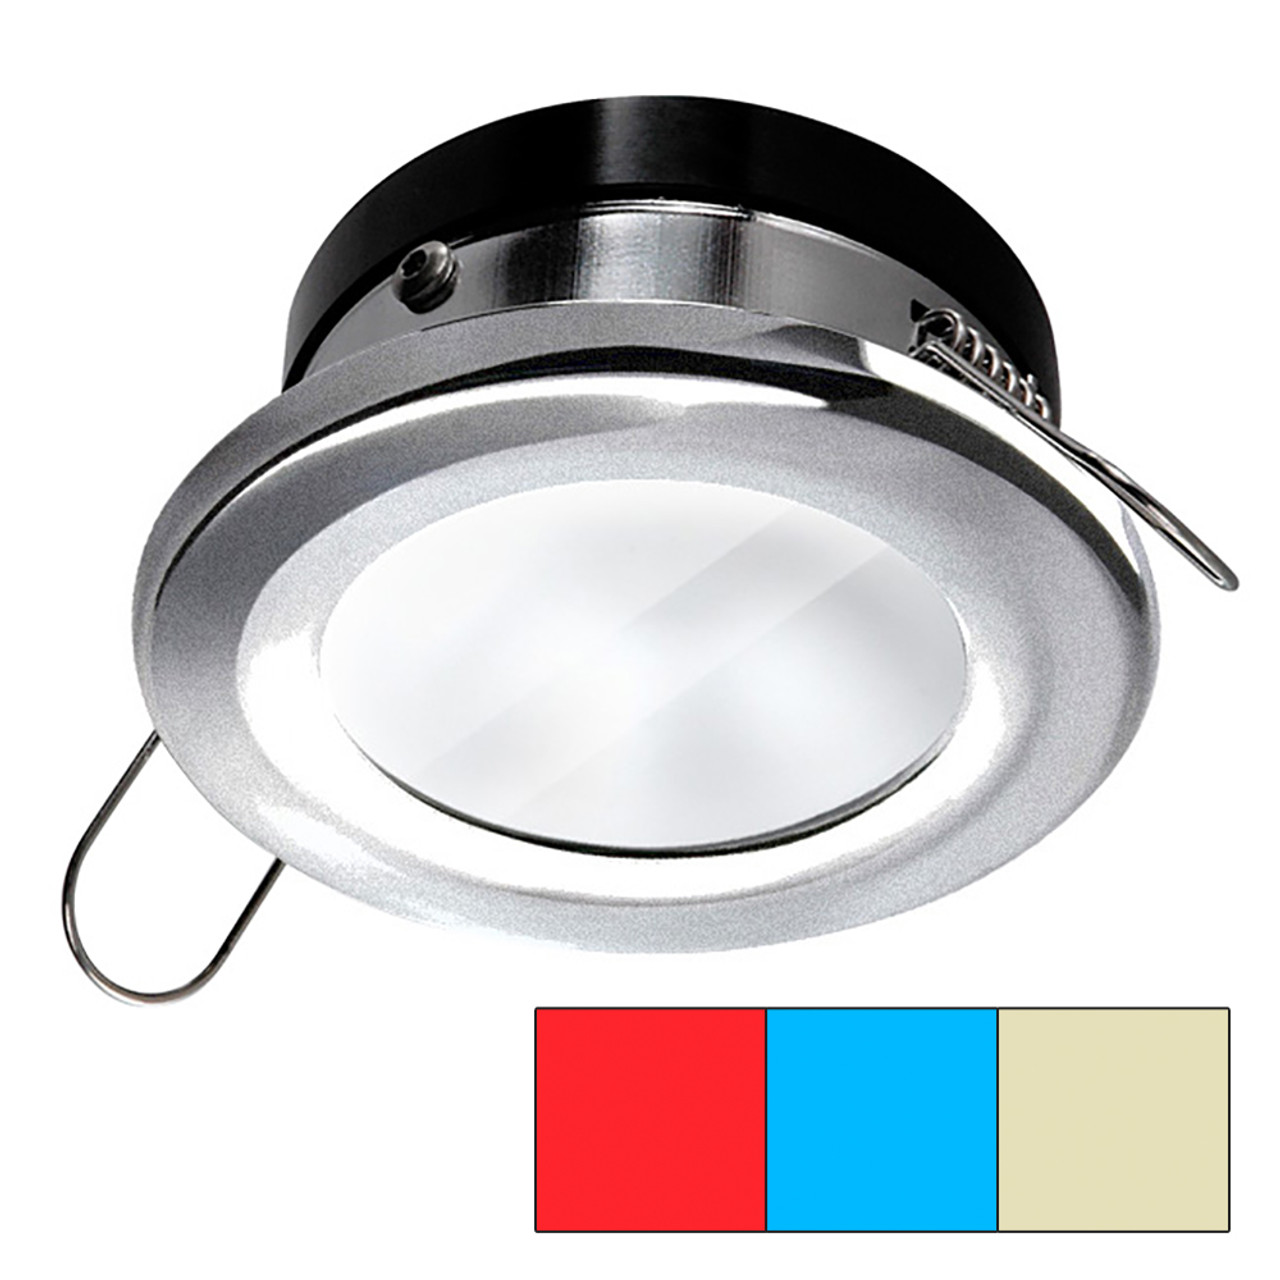 i2Systems - Apeiron A1120 - Spring Mount, Round, Red/Warm White/Blue, Brushed Nickel - Apollo Lighting